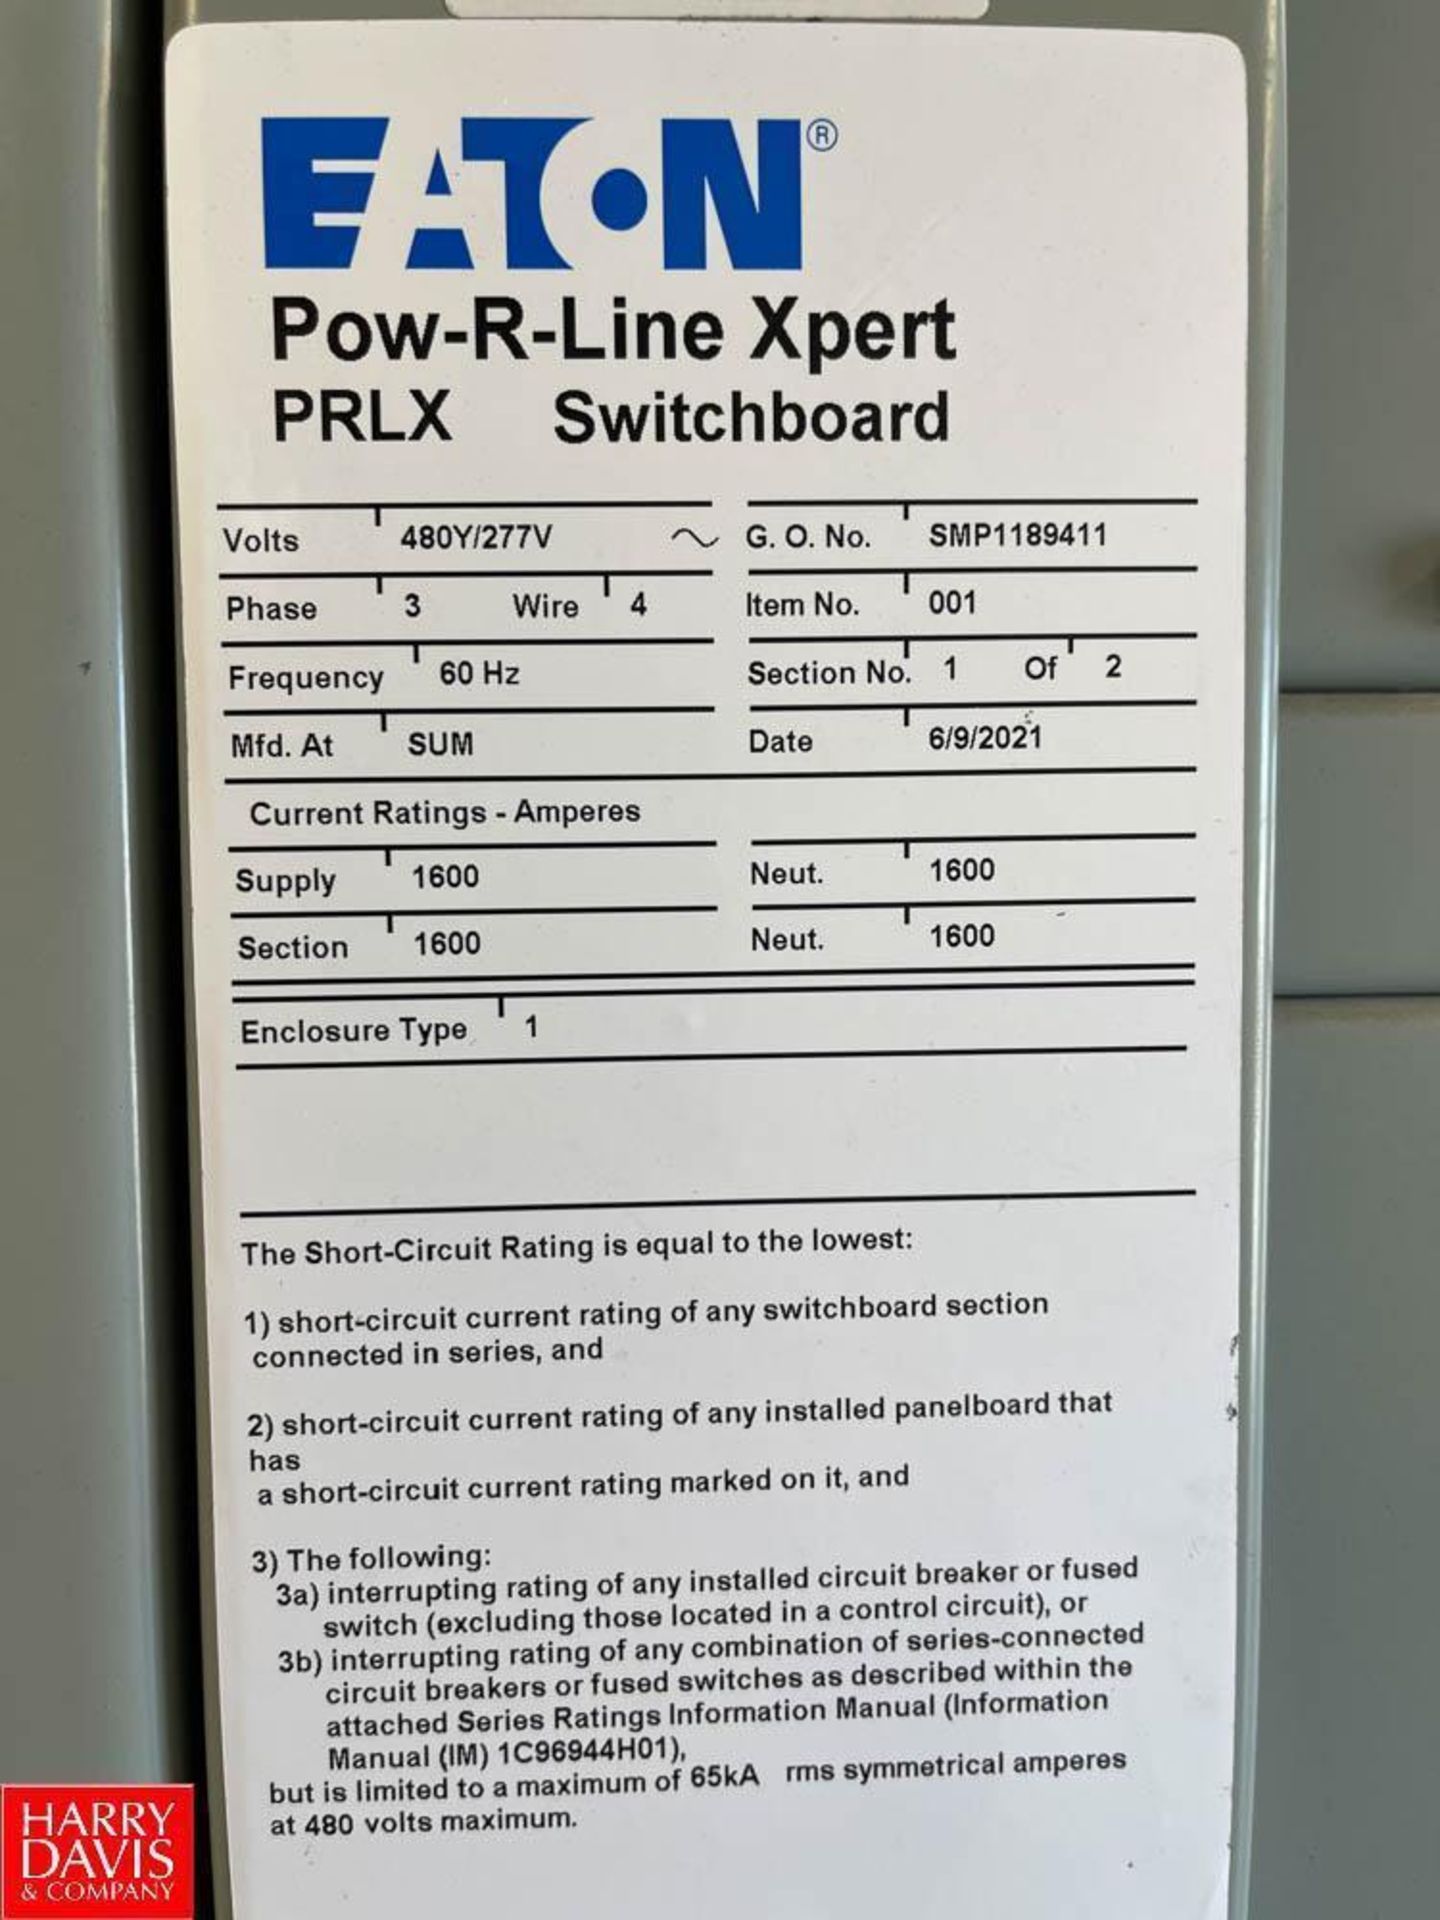 2021 Eaton Pow-R-Line Xpert Switchboard - Image 4 of 4